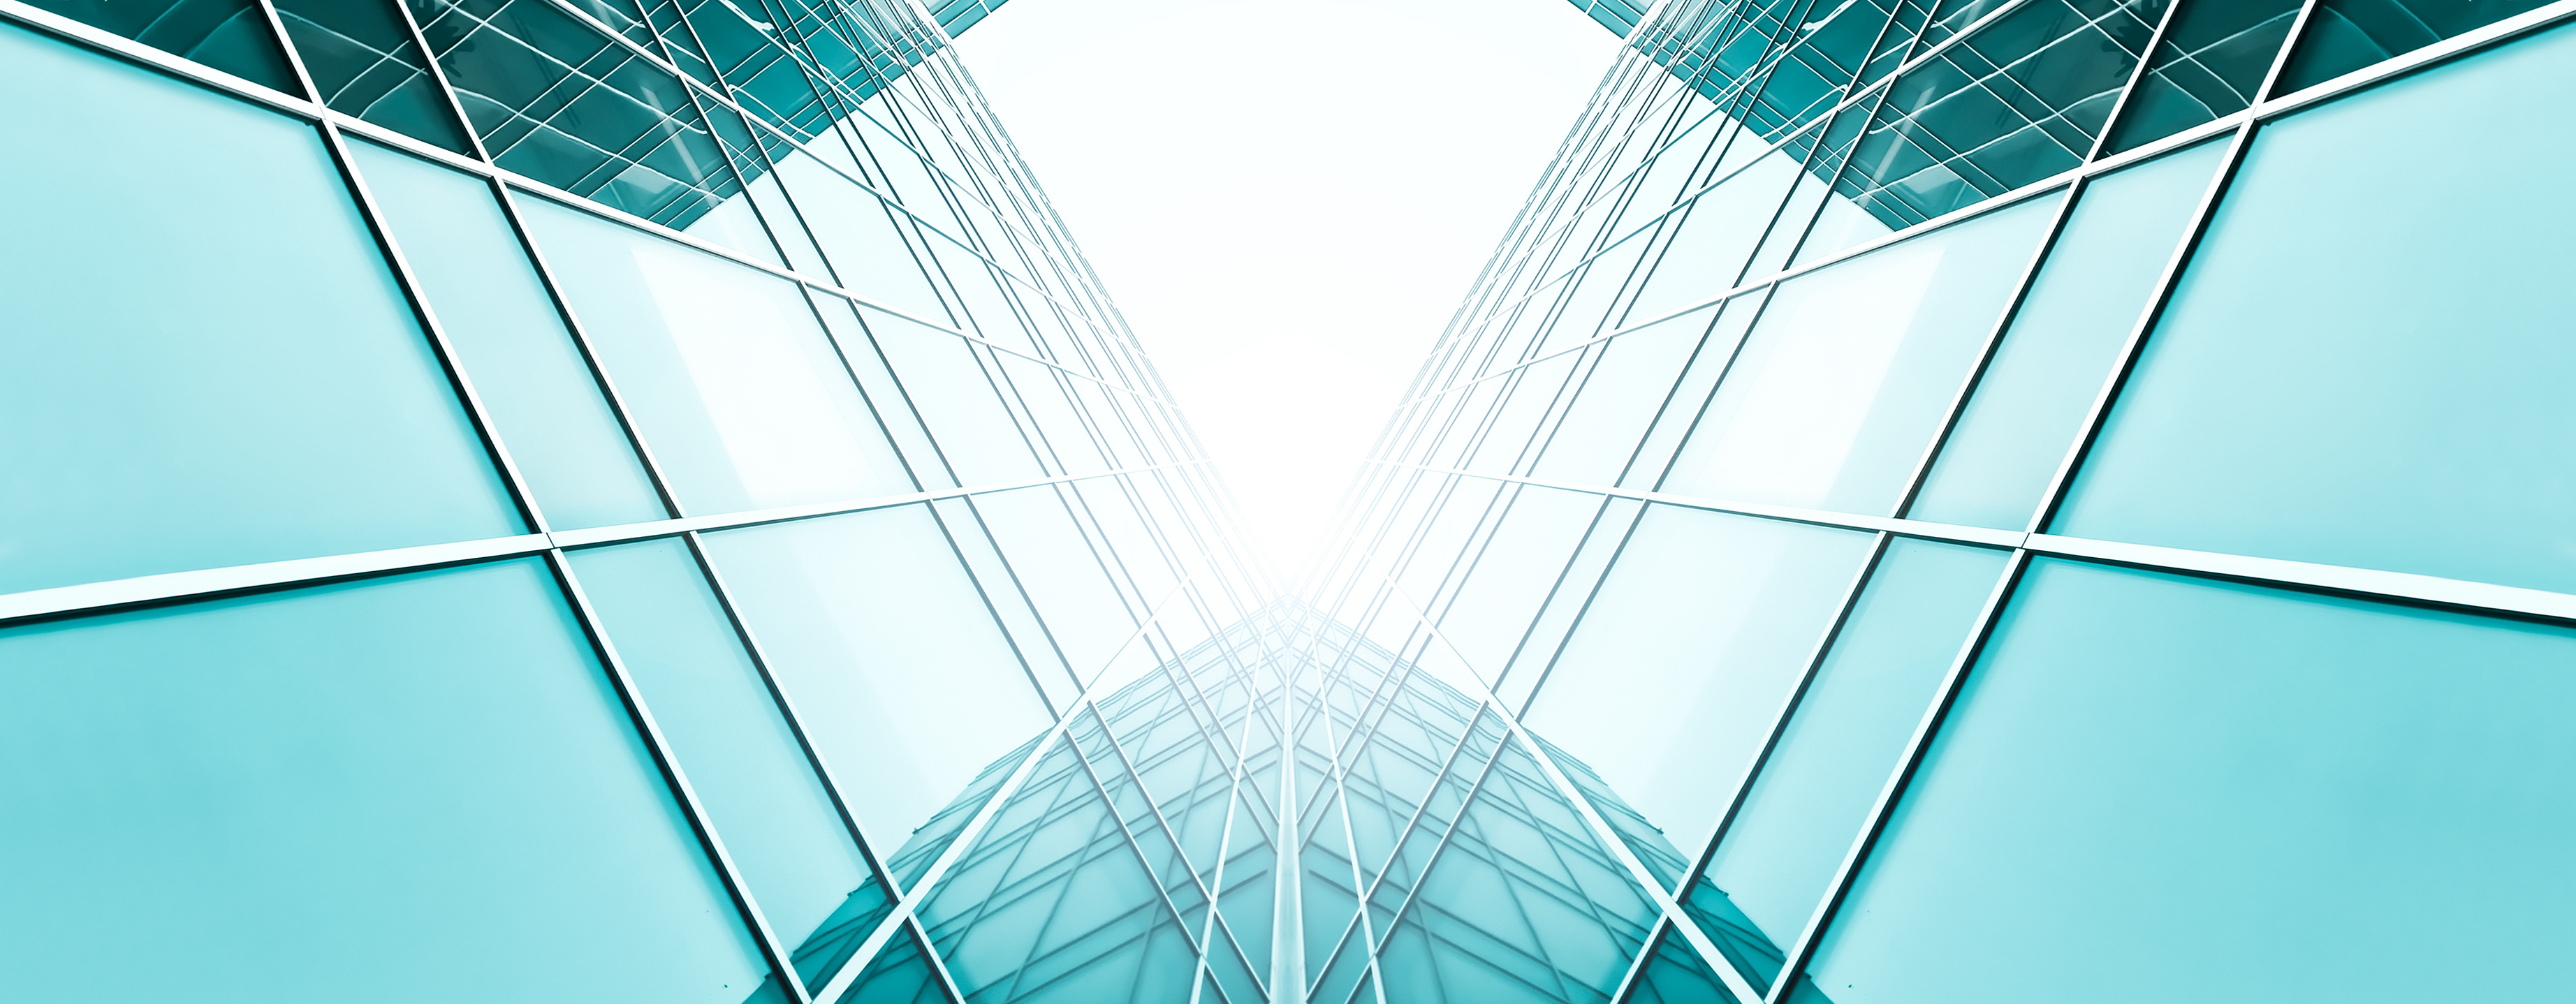 abstract illustration of glass frame building skyscrapers